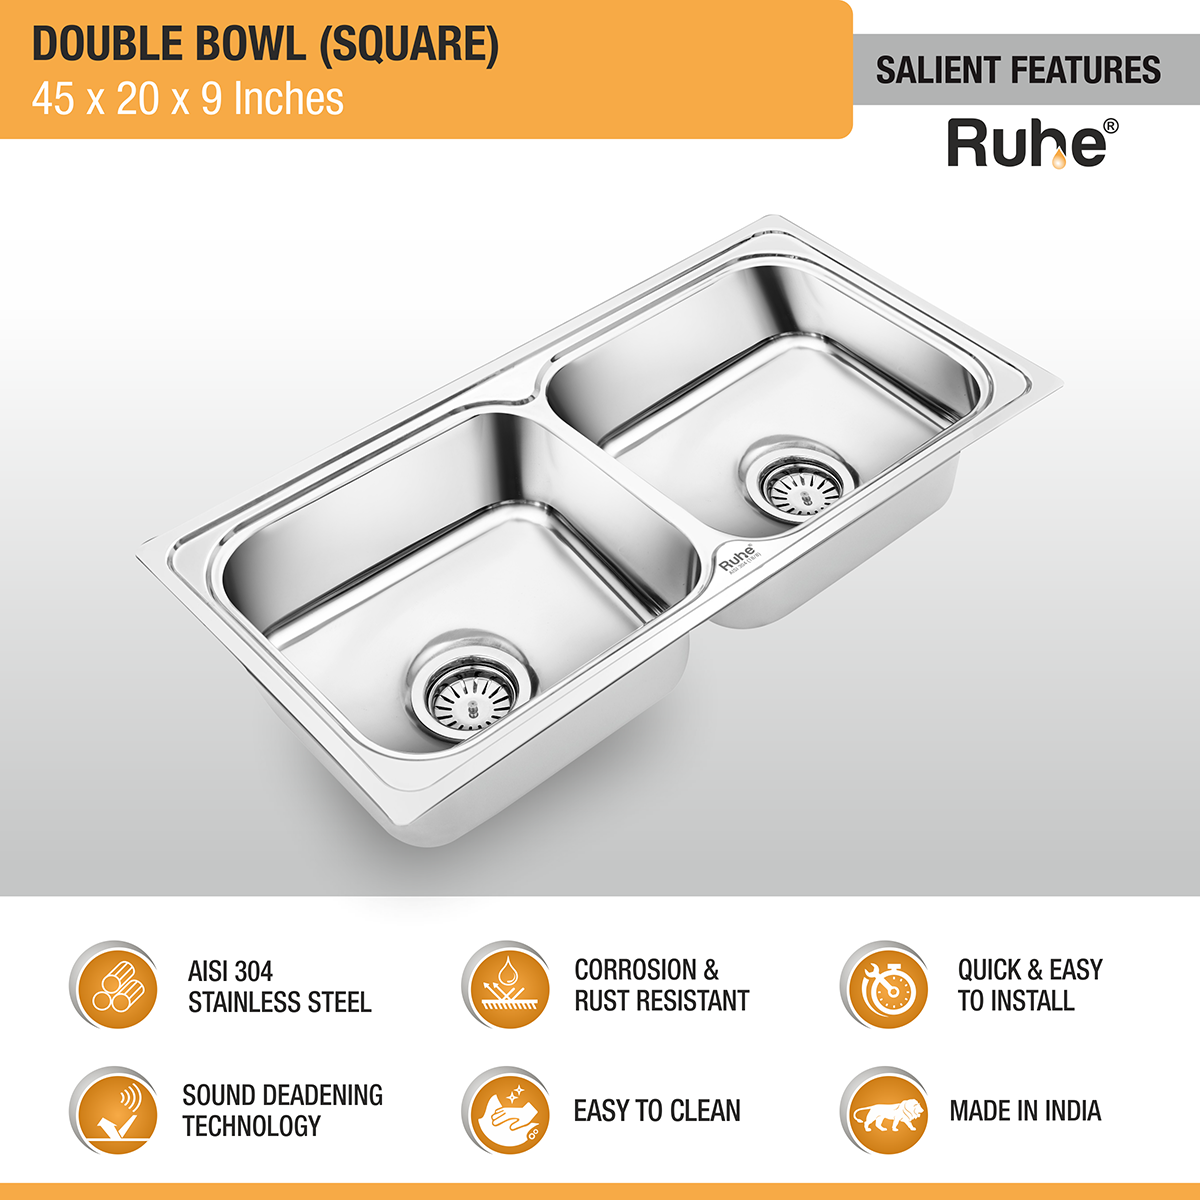 Square Double Bowl (45 x 20 x 9 Inches) 304-Grade Kitchen Sink features and benefits